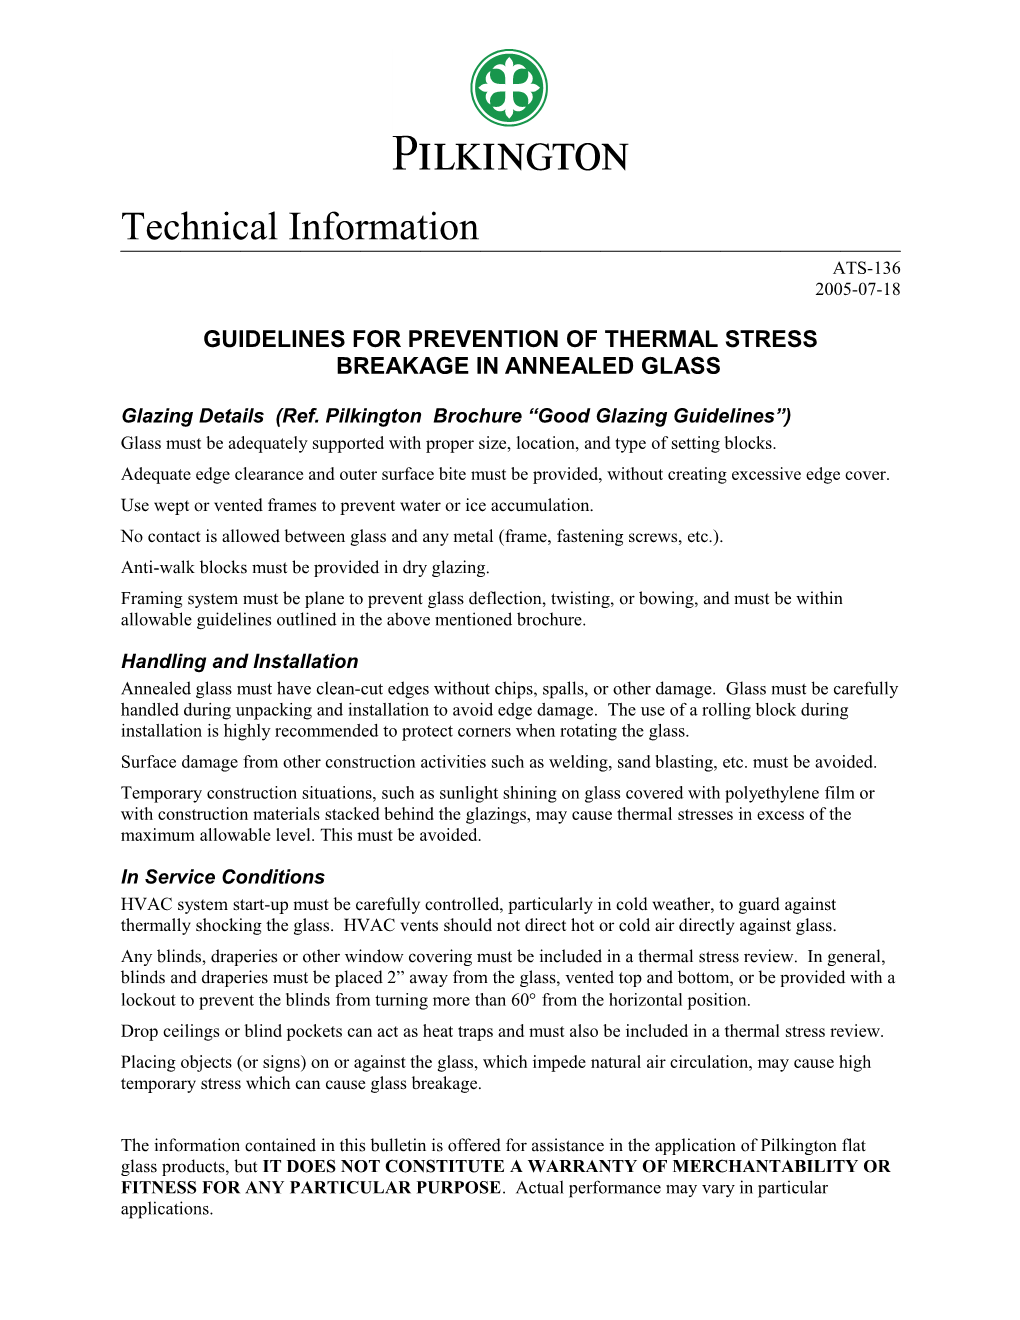 Guidelines for Prevention of Thermal Stress Breakage in Annealed Glass